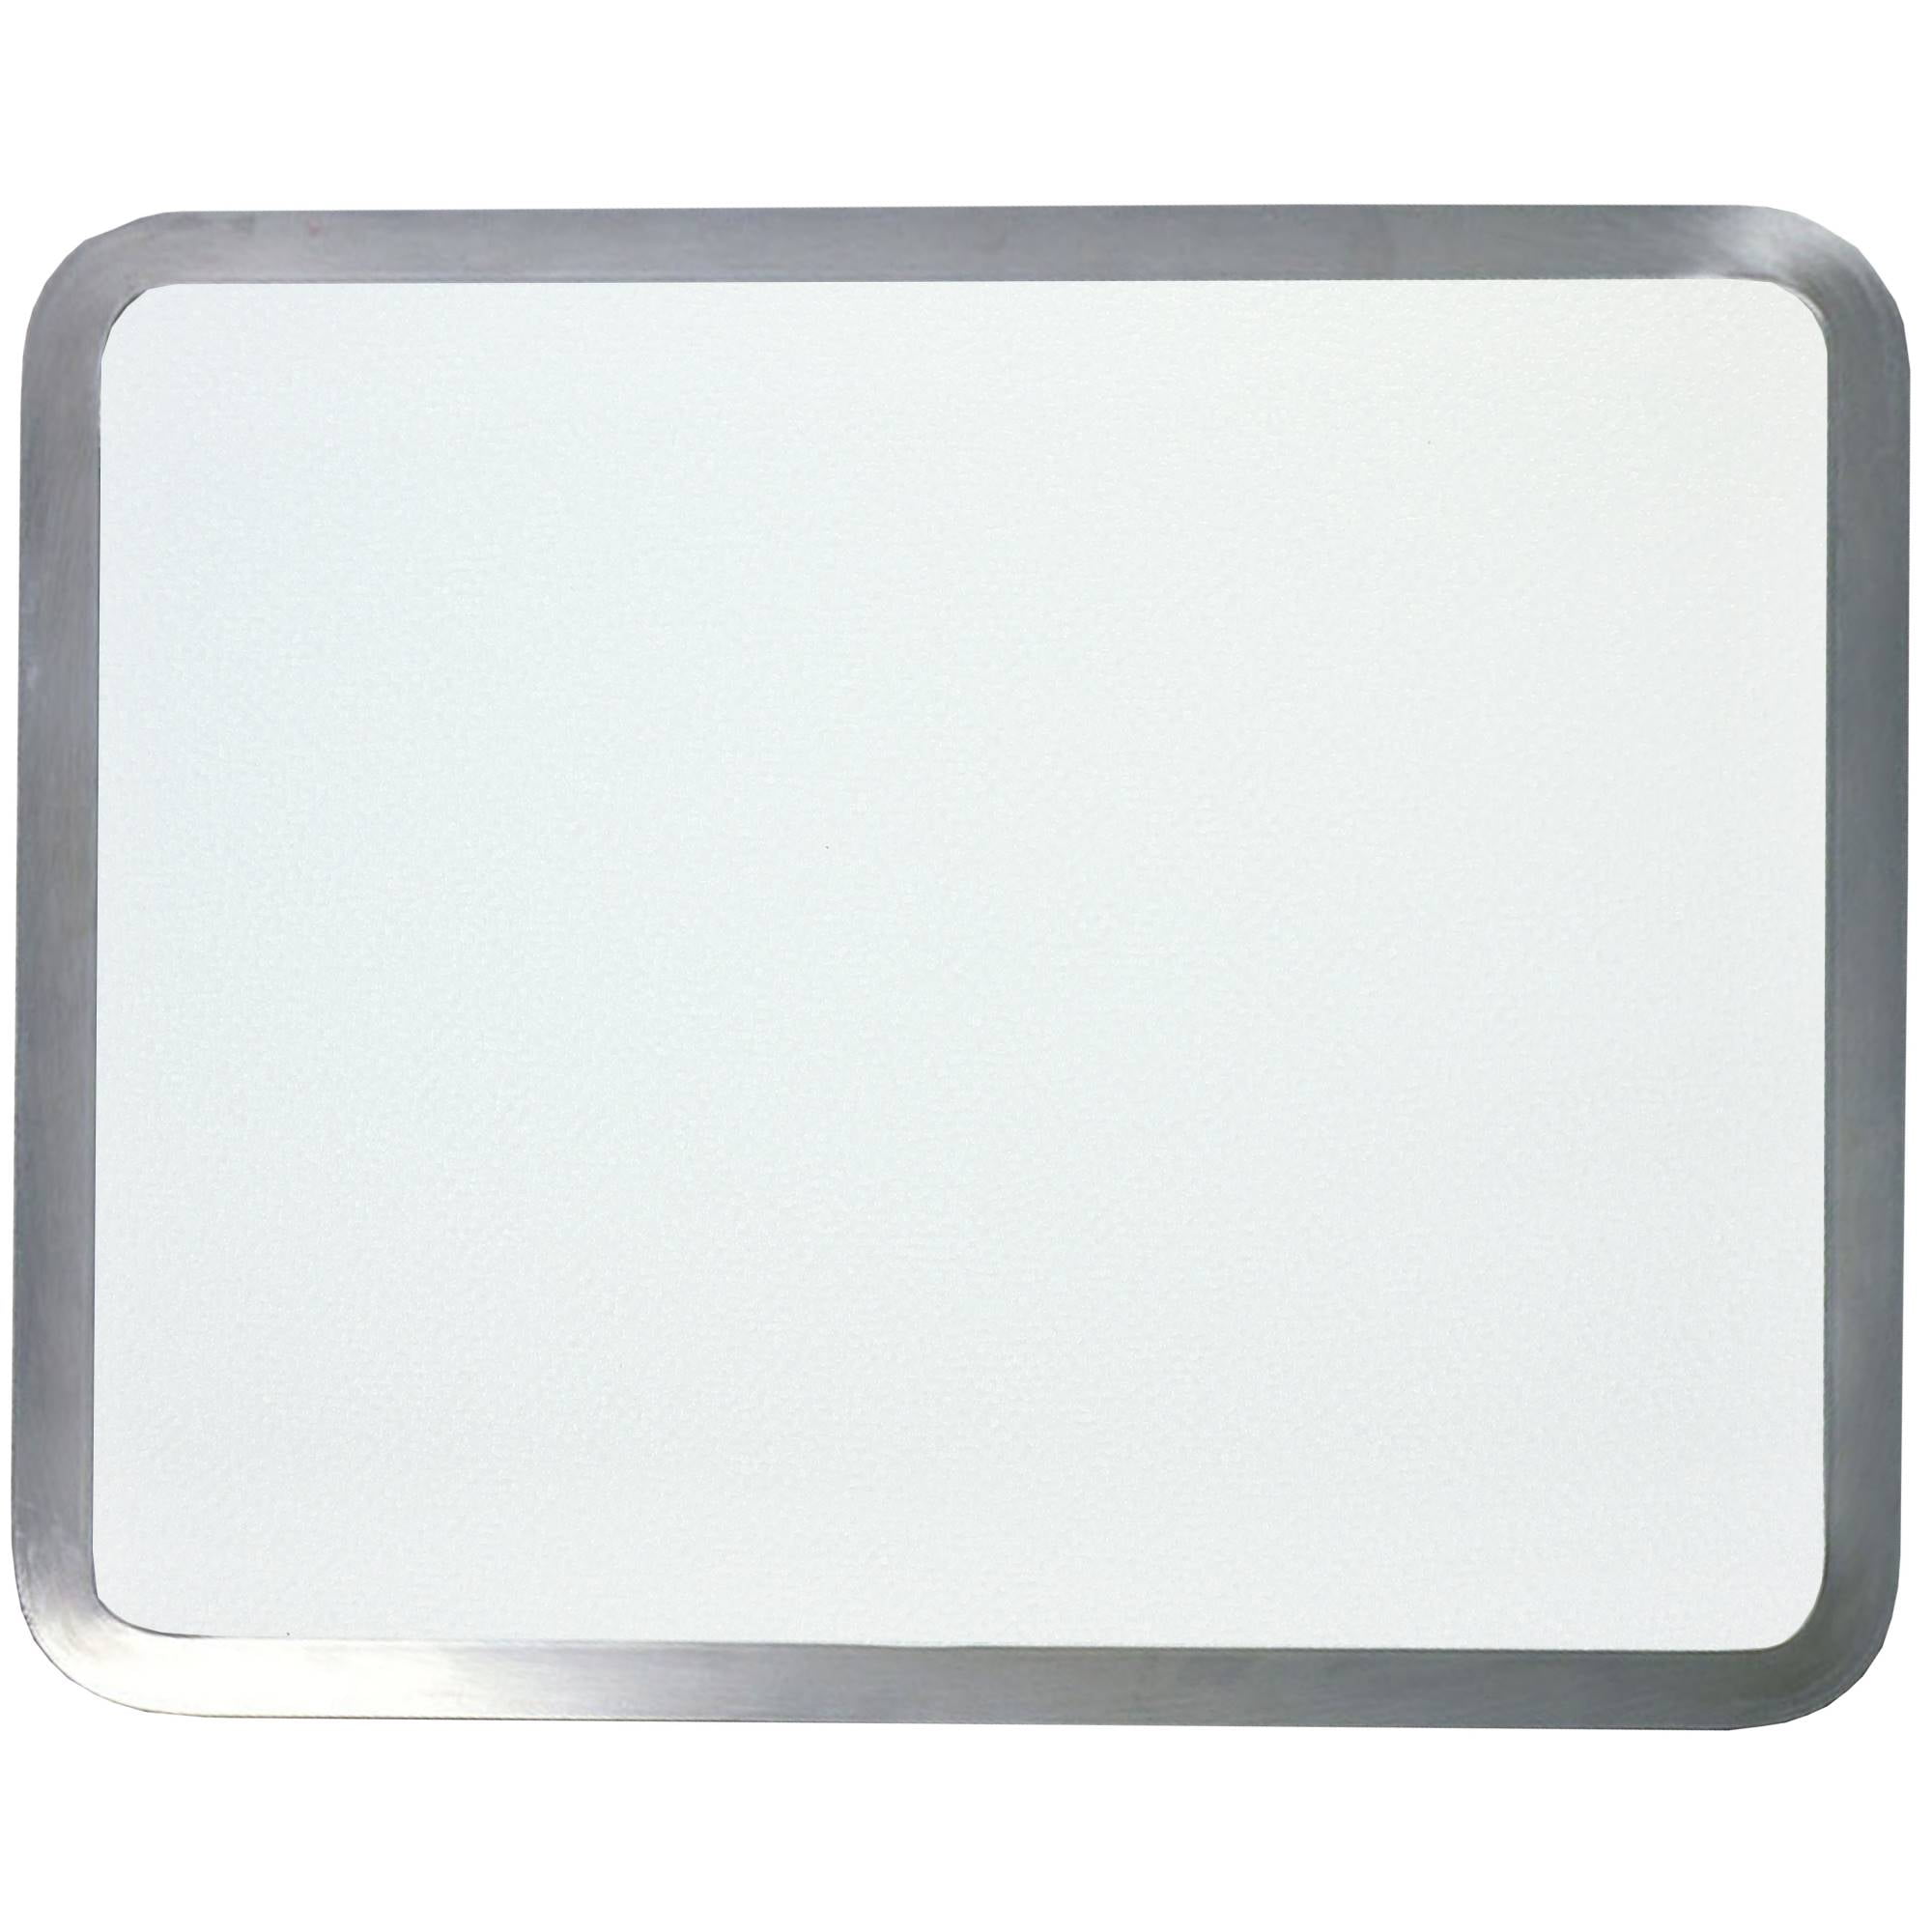 12PACK Sublimation Blank Tempered Glass Cutting Board with White Coating Glossy 